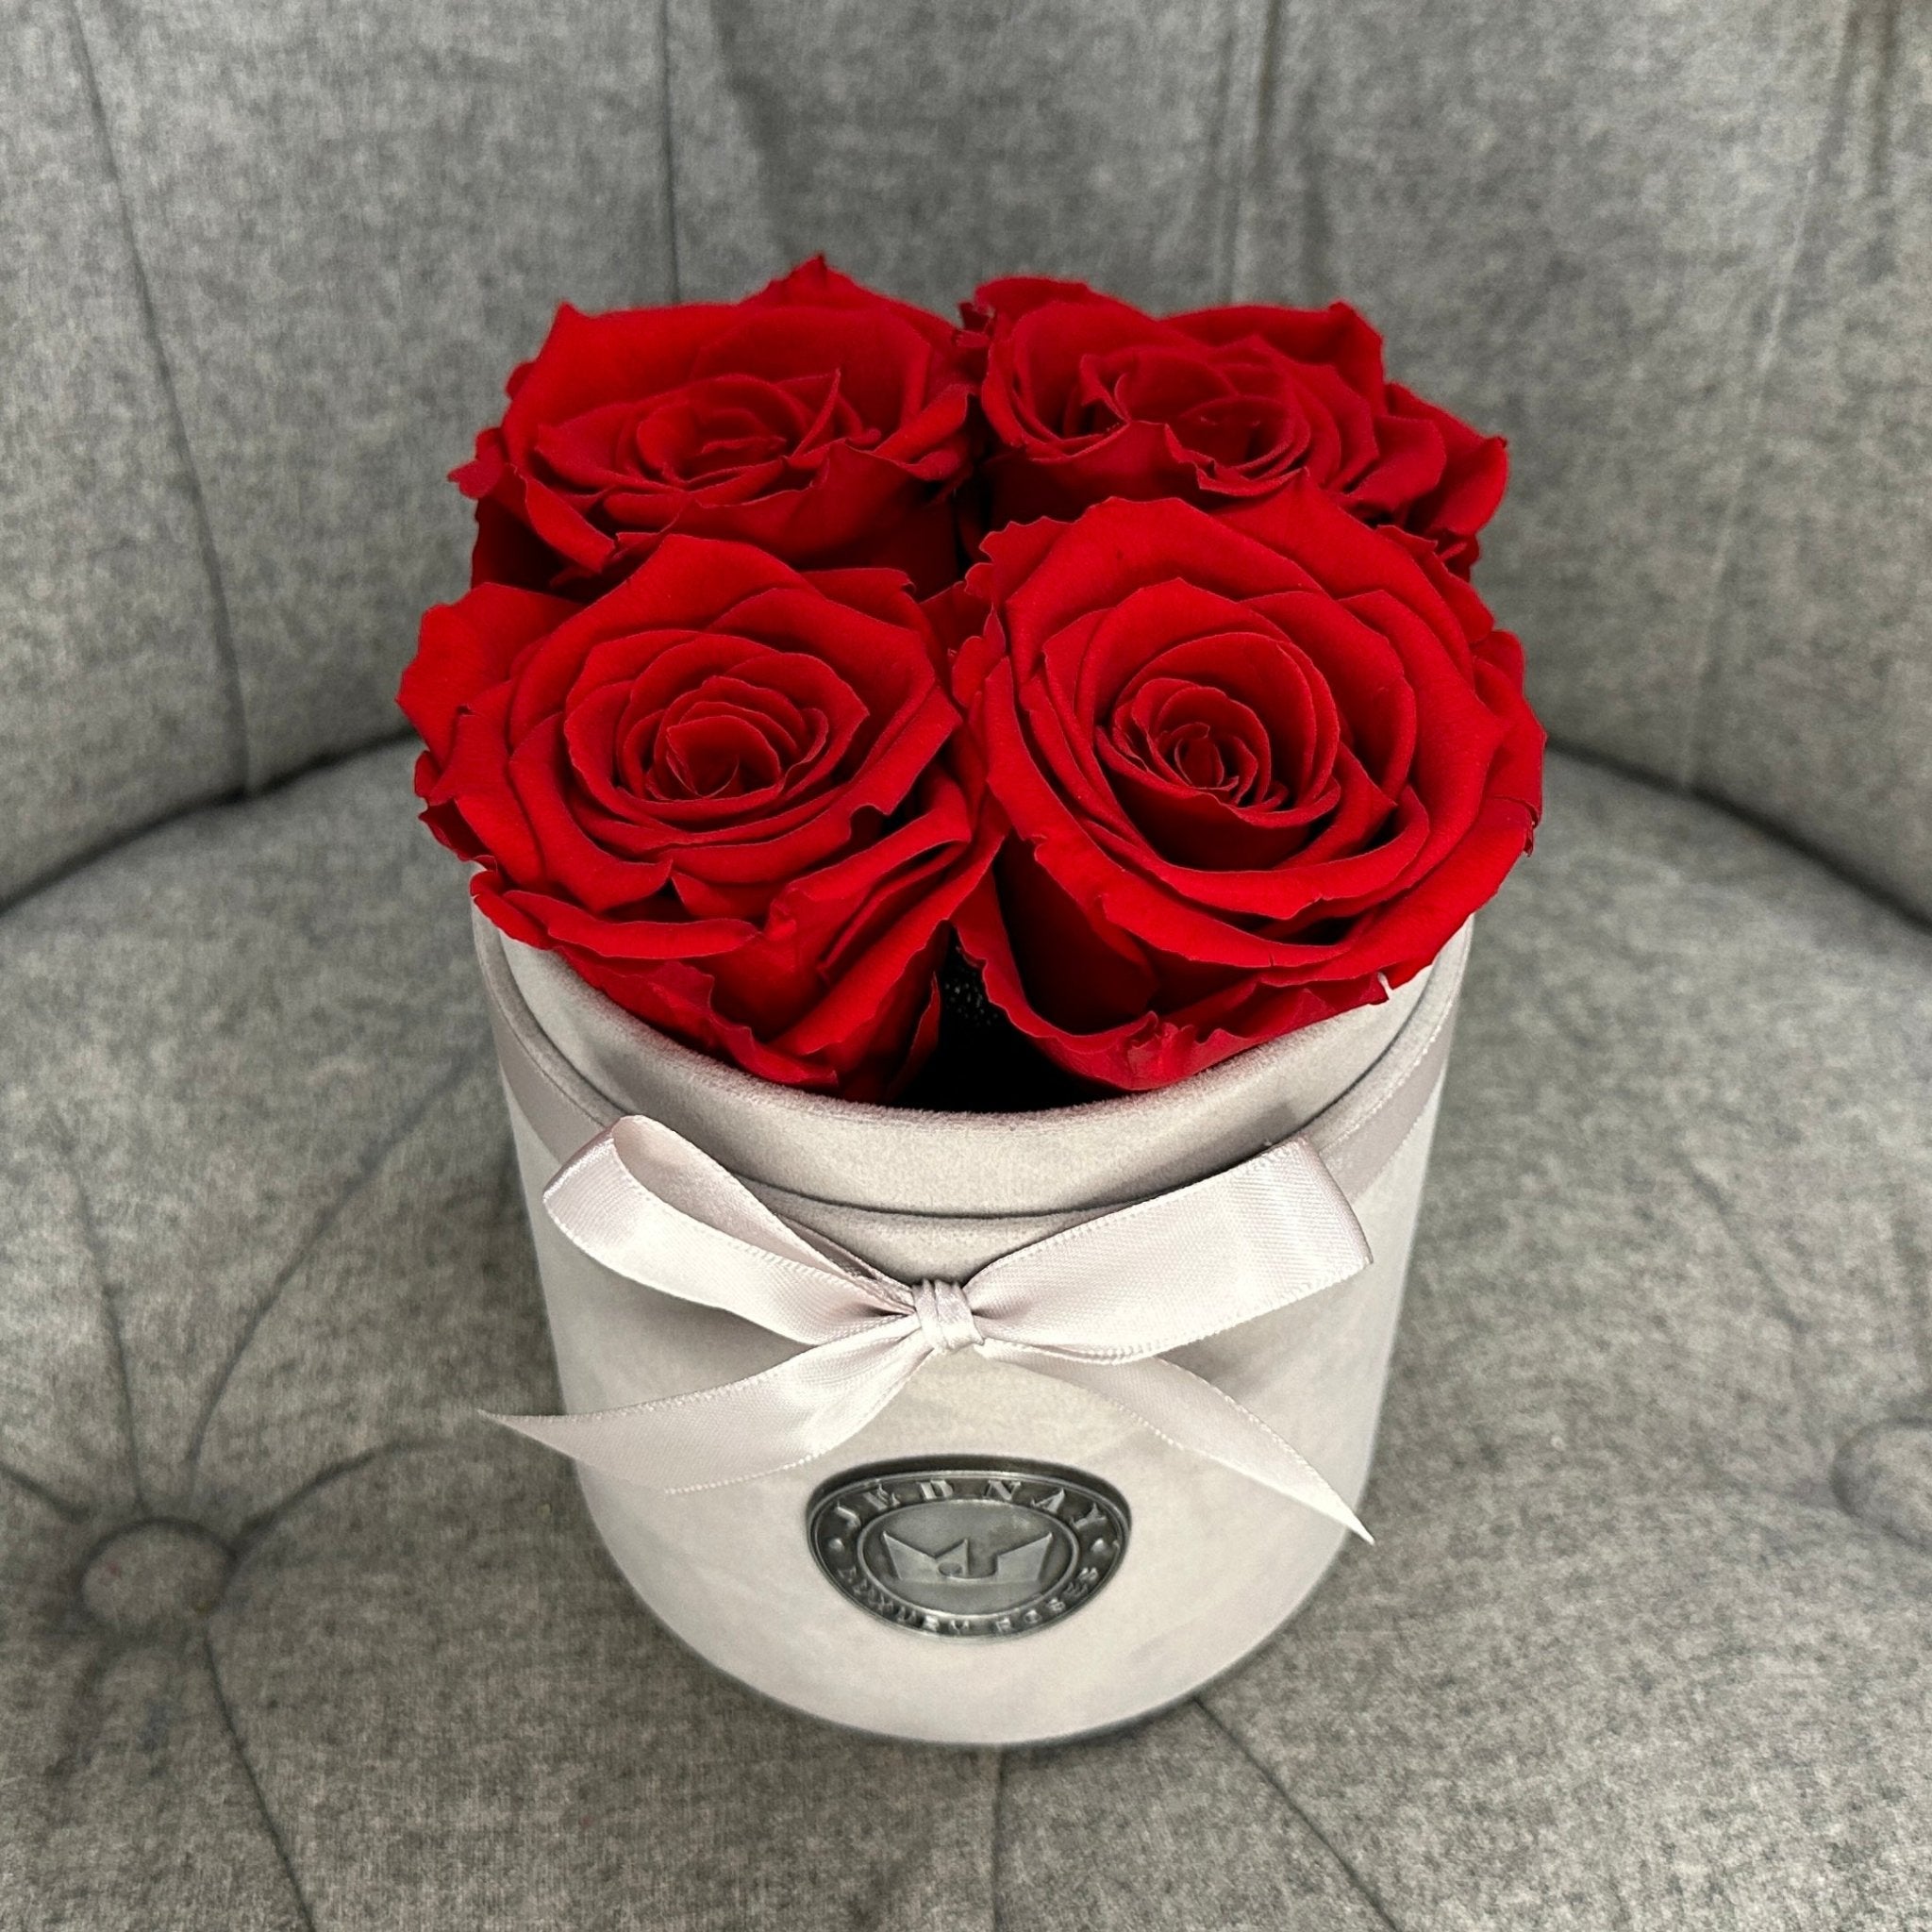 Petite Grey Suede Forever Rose Box - Classic Red Eternal Roses - Jednay Roses